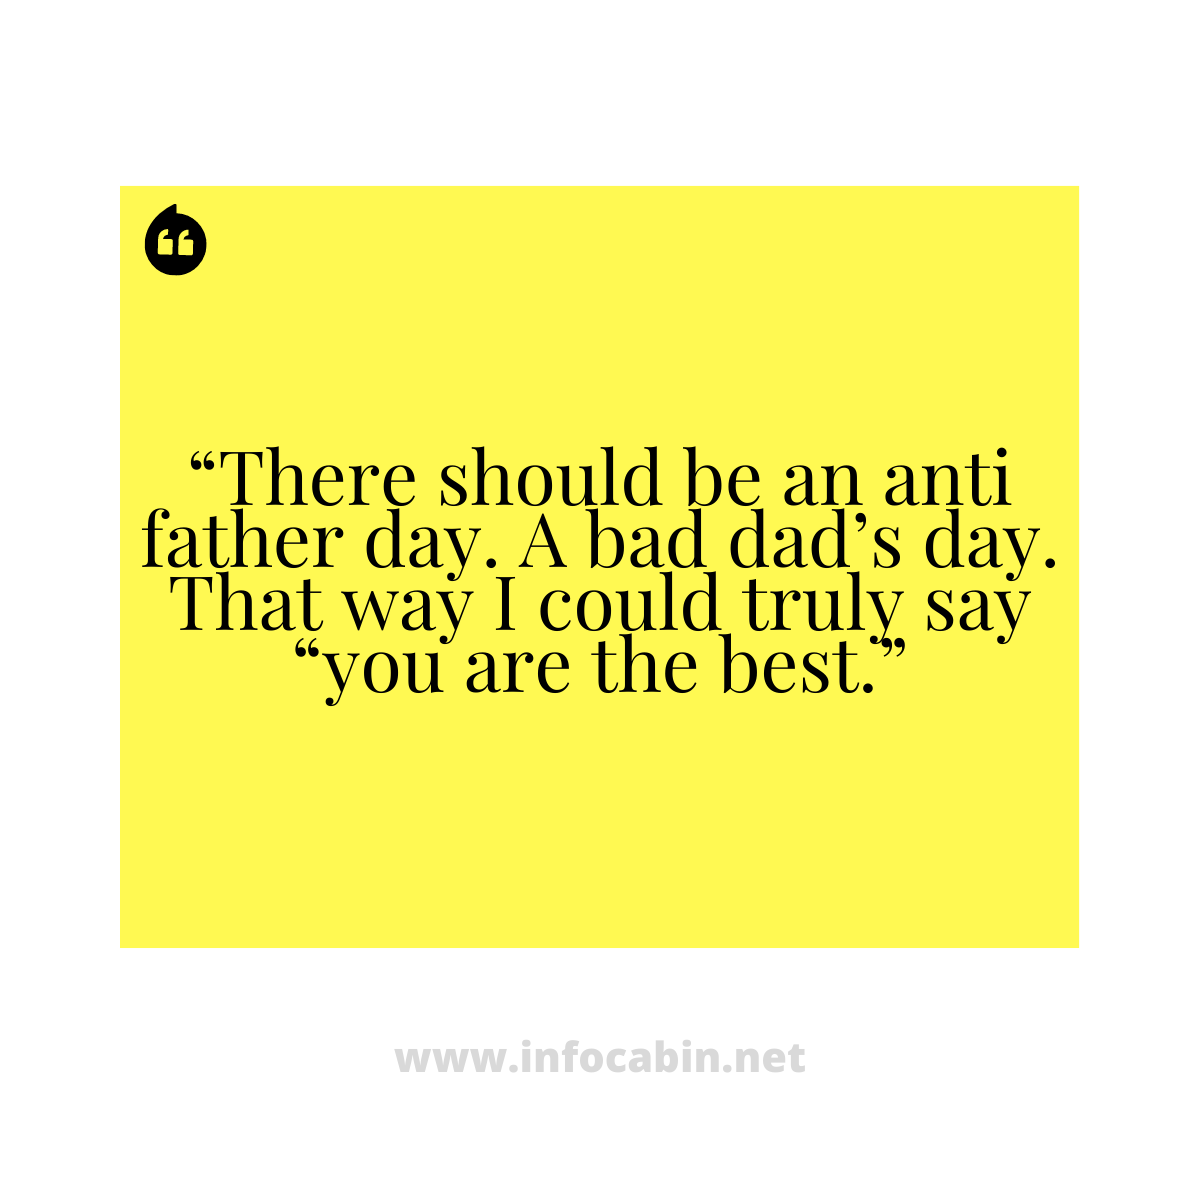 “There should be an anti father day. A bad dad’s day. That way I could truly say “you are the best.”